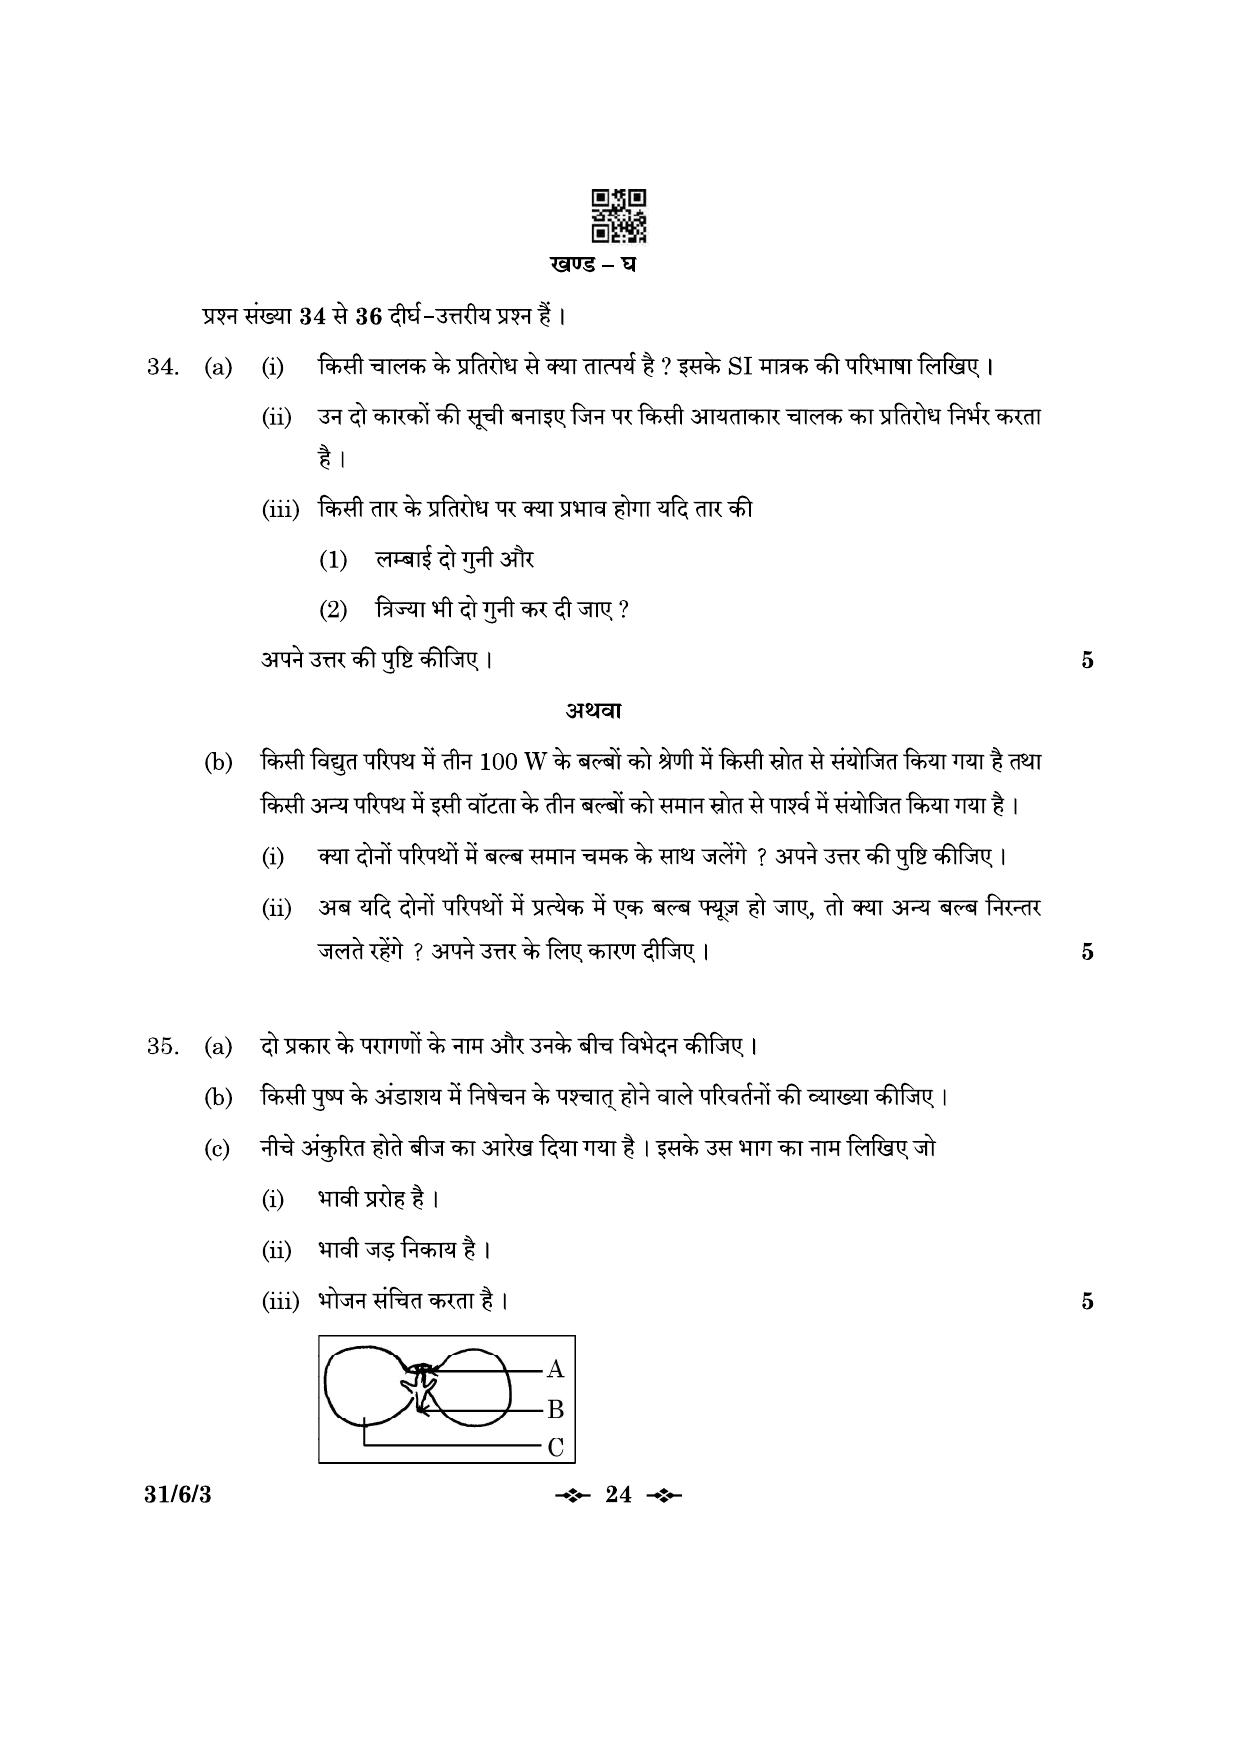 CBSE Class 10 31-6-3 Science 2023 Question Paper - Page 24